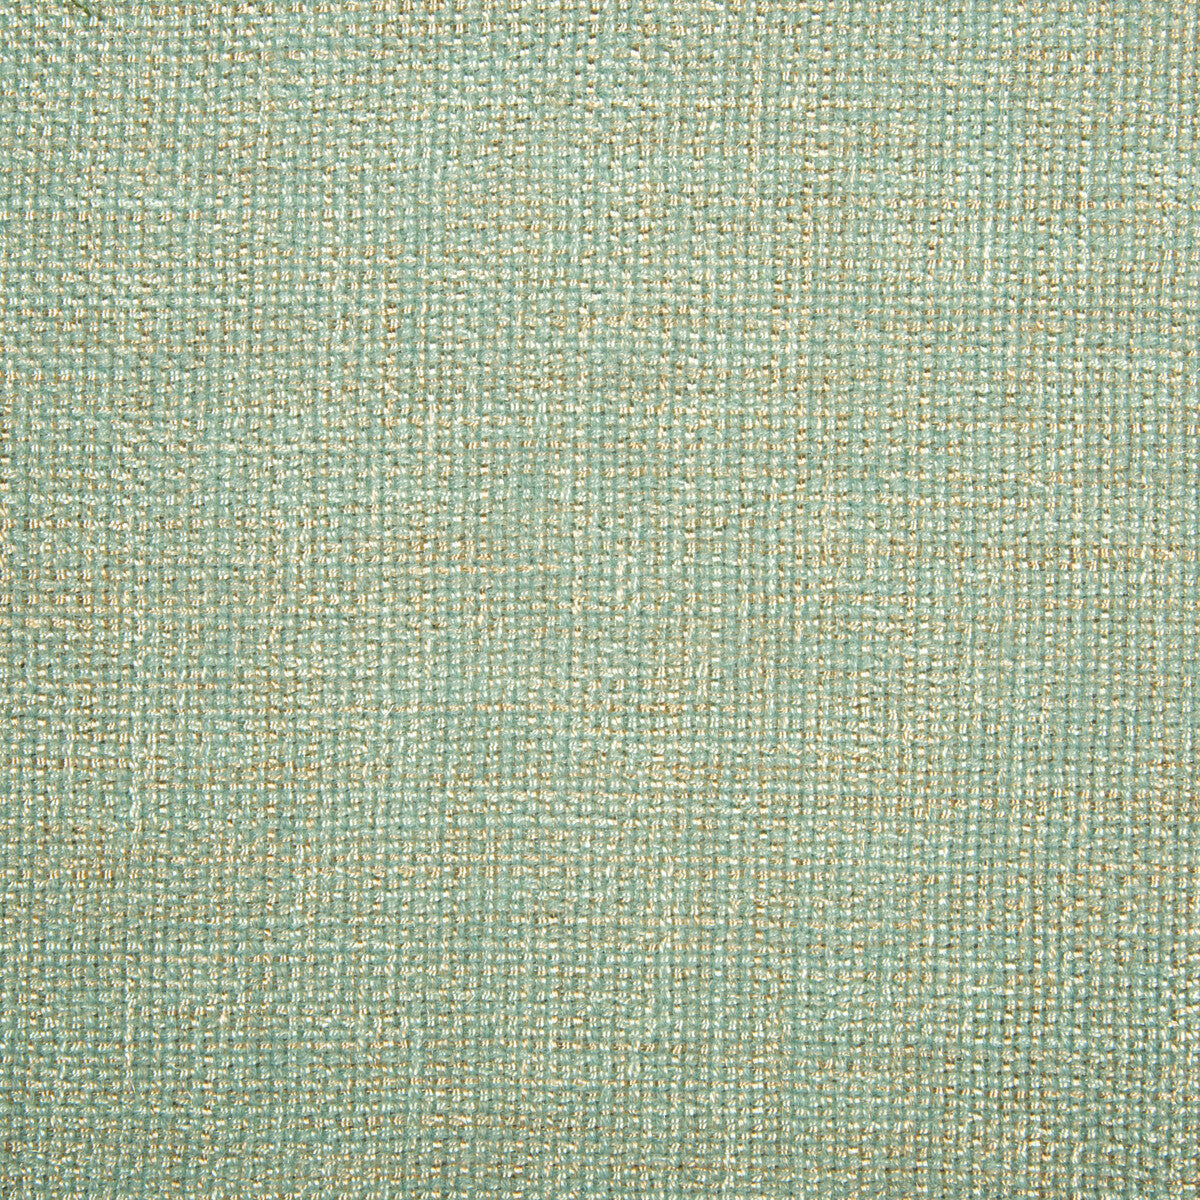 Kravet Contract fabric in 34926-1615 color - pattern 34926.1615.0 - by Kravet Contract